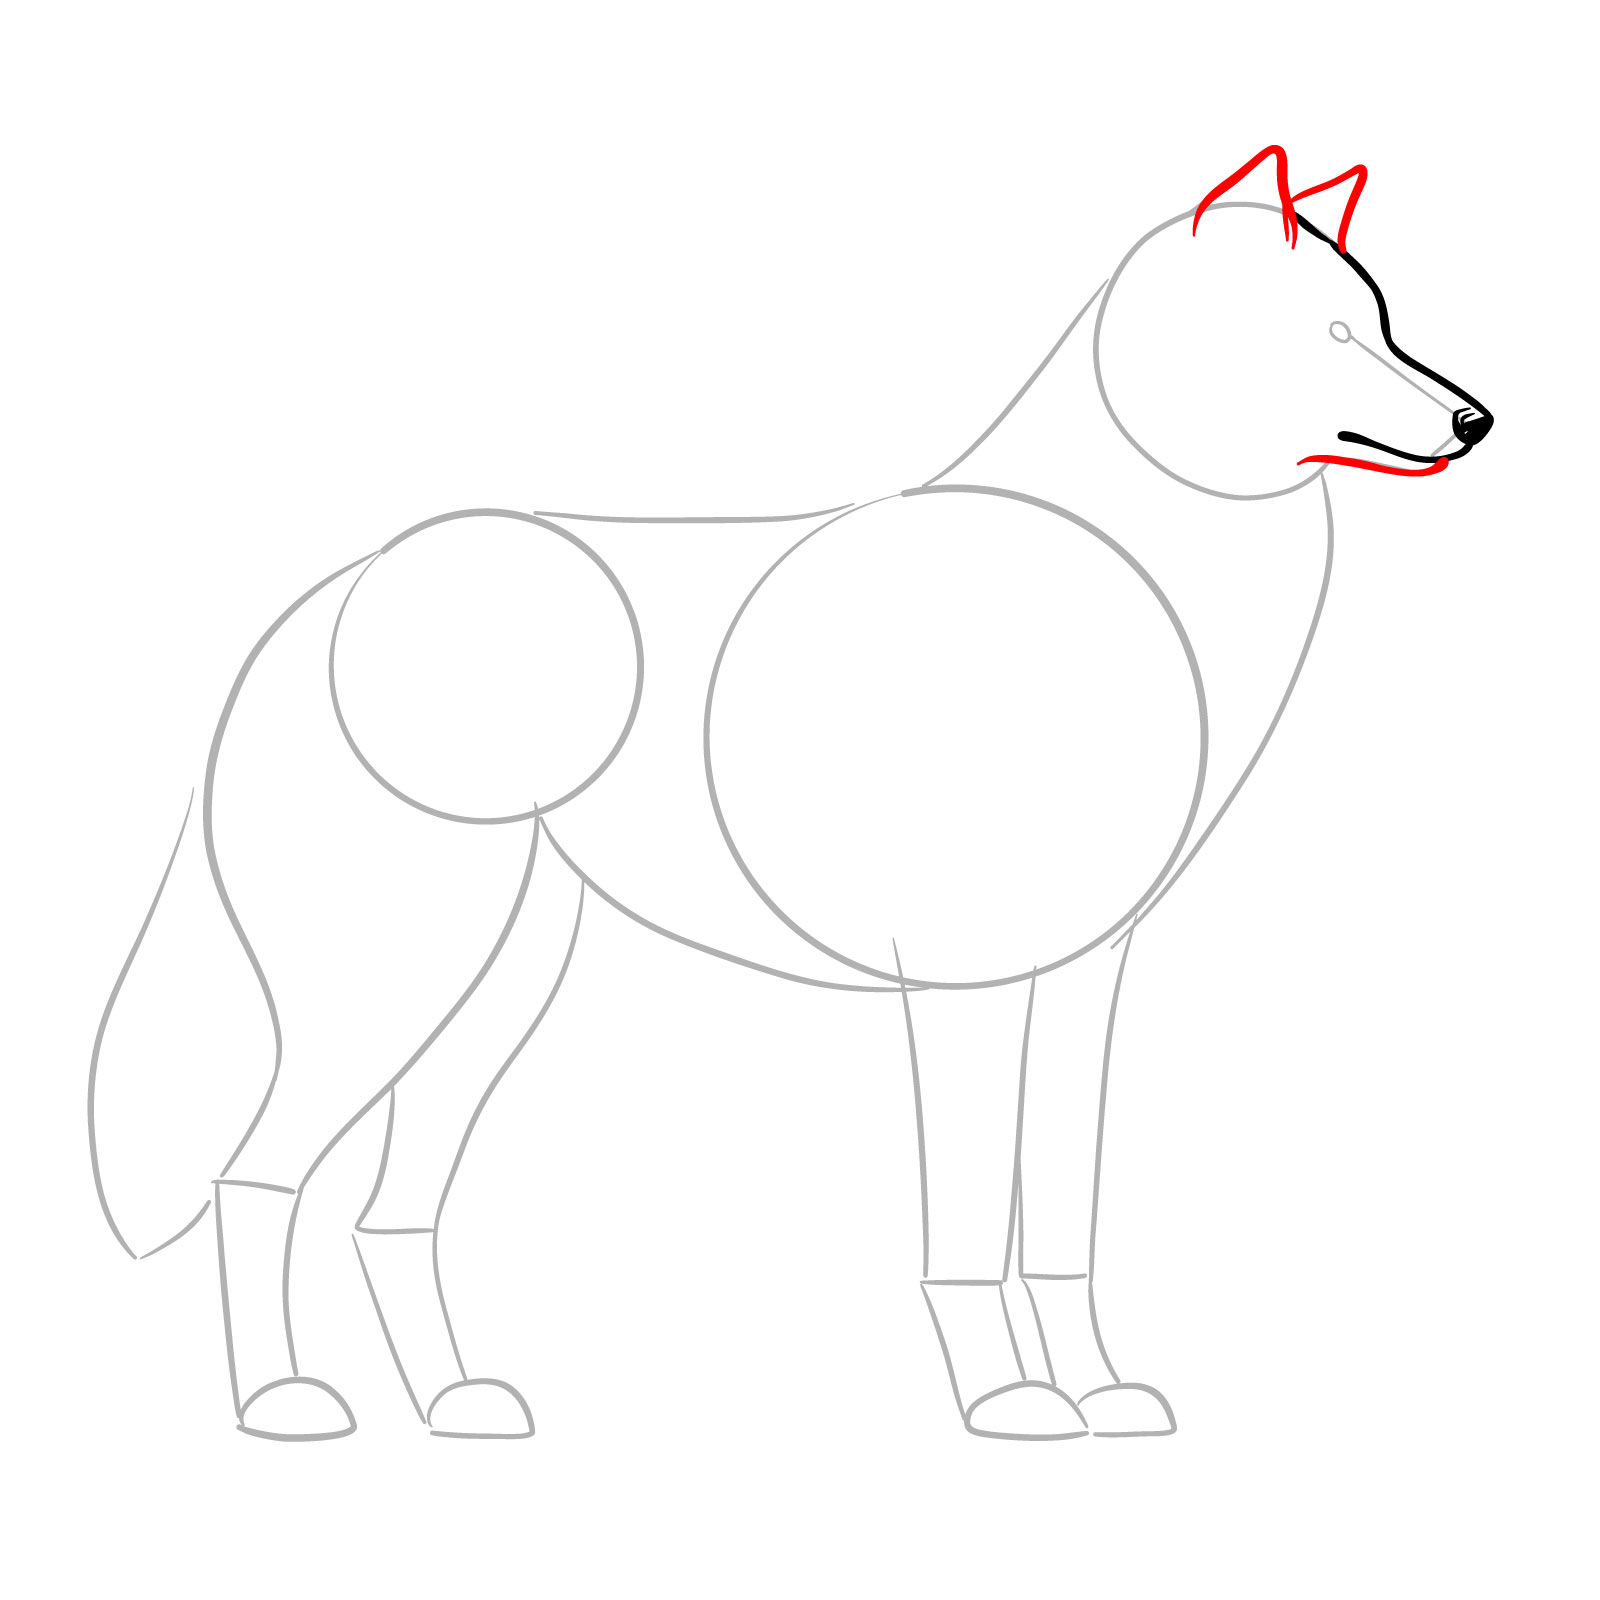 Completing the snout and adding ears to the wolf side view drawing - step 05